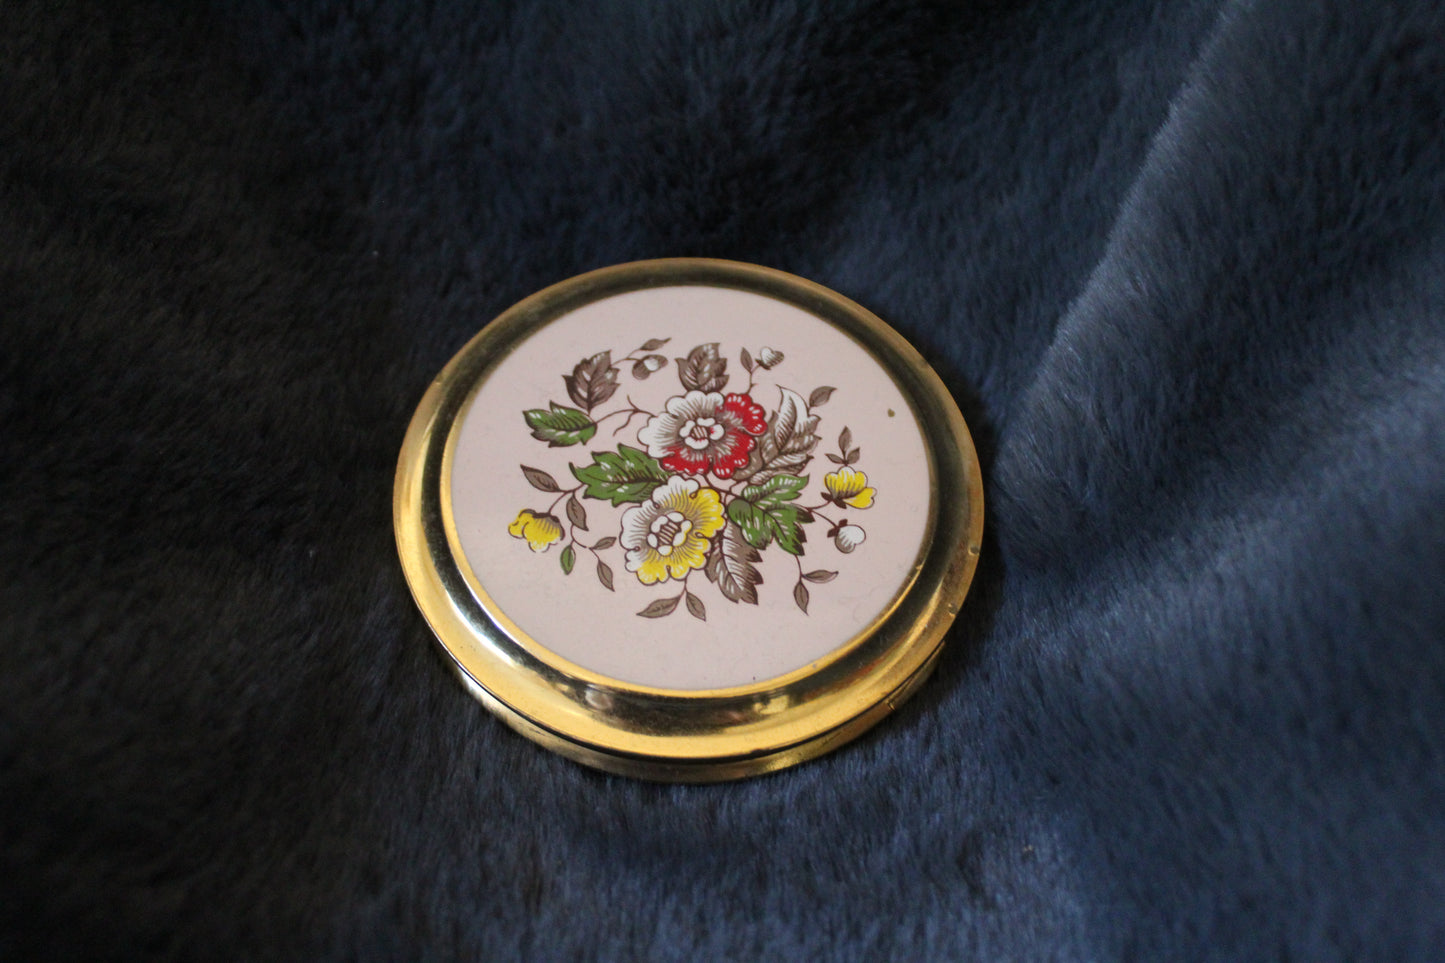 Mystery compact with floral design